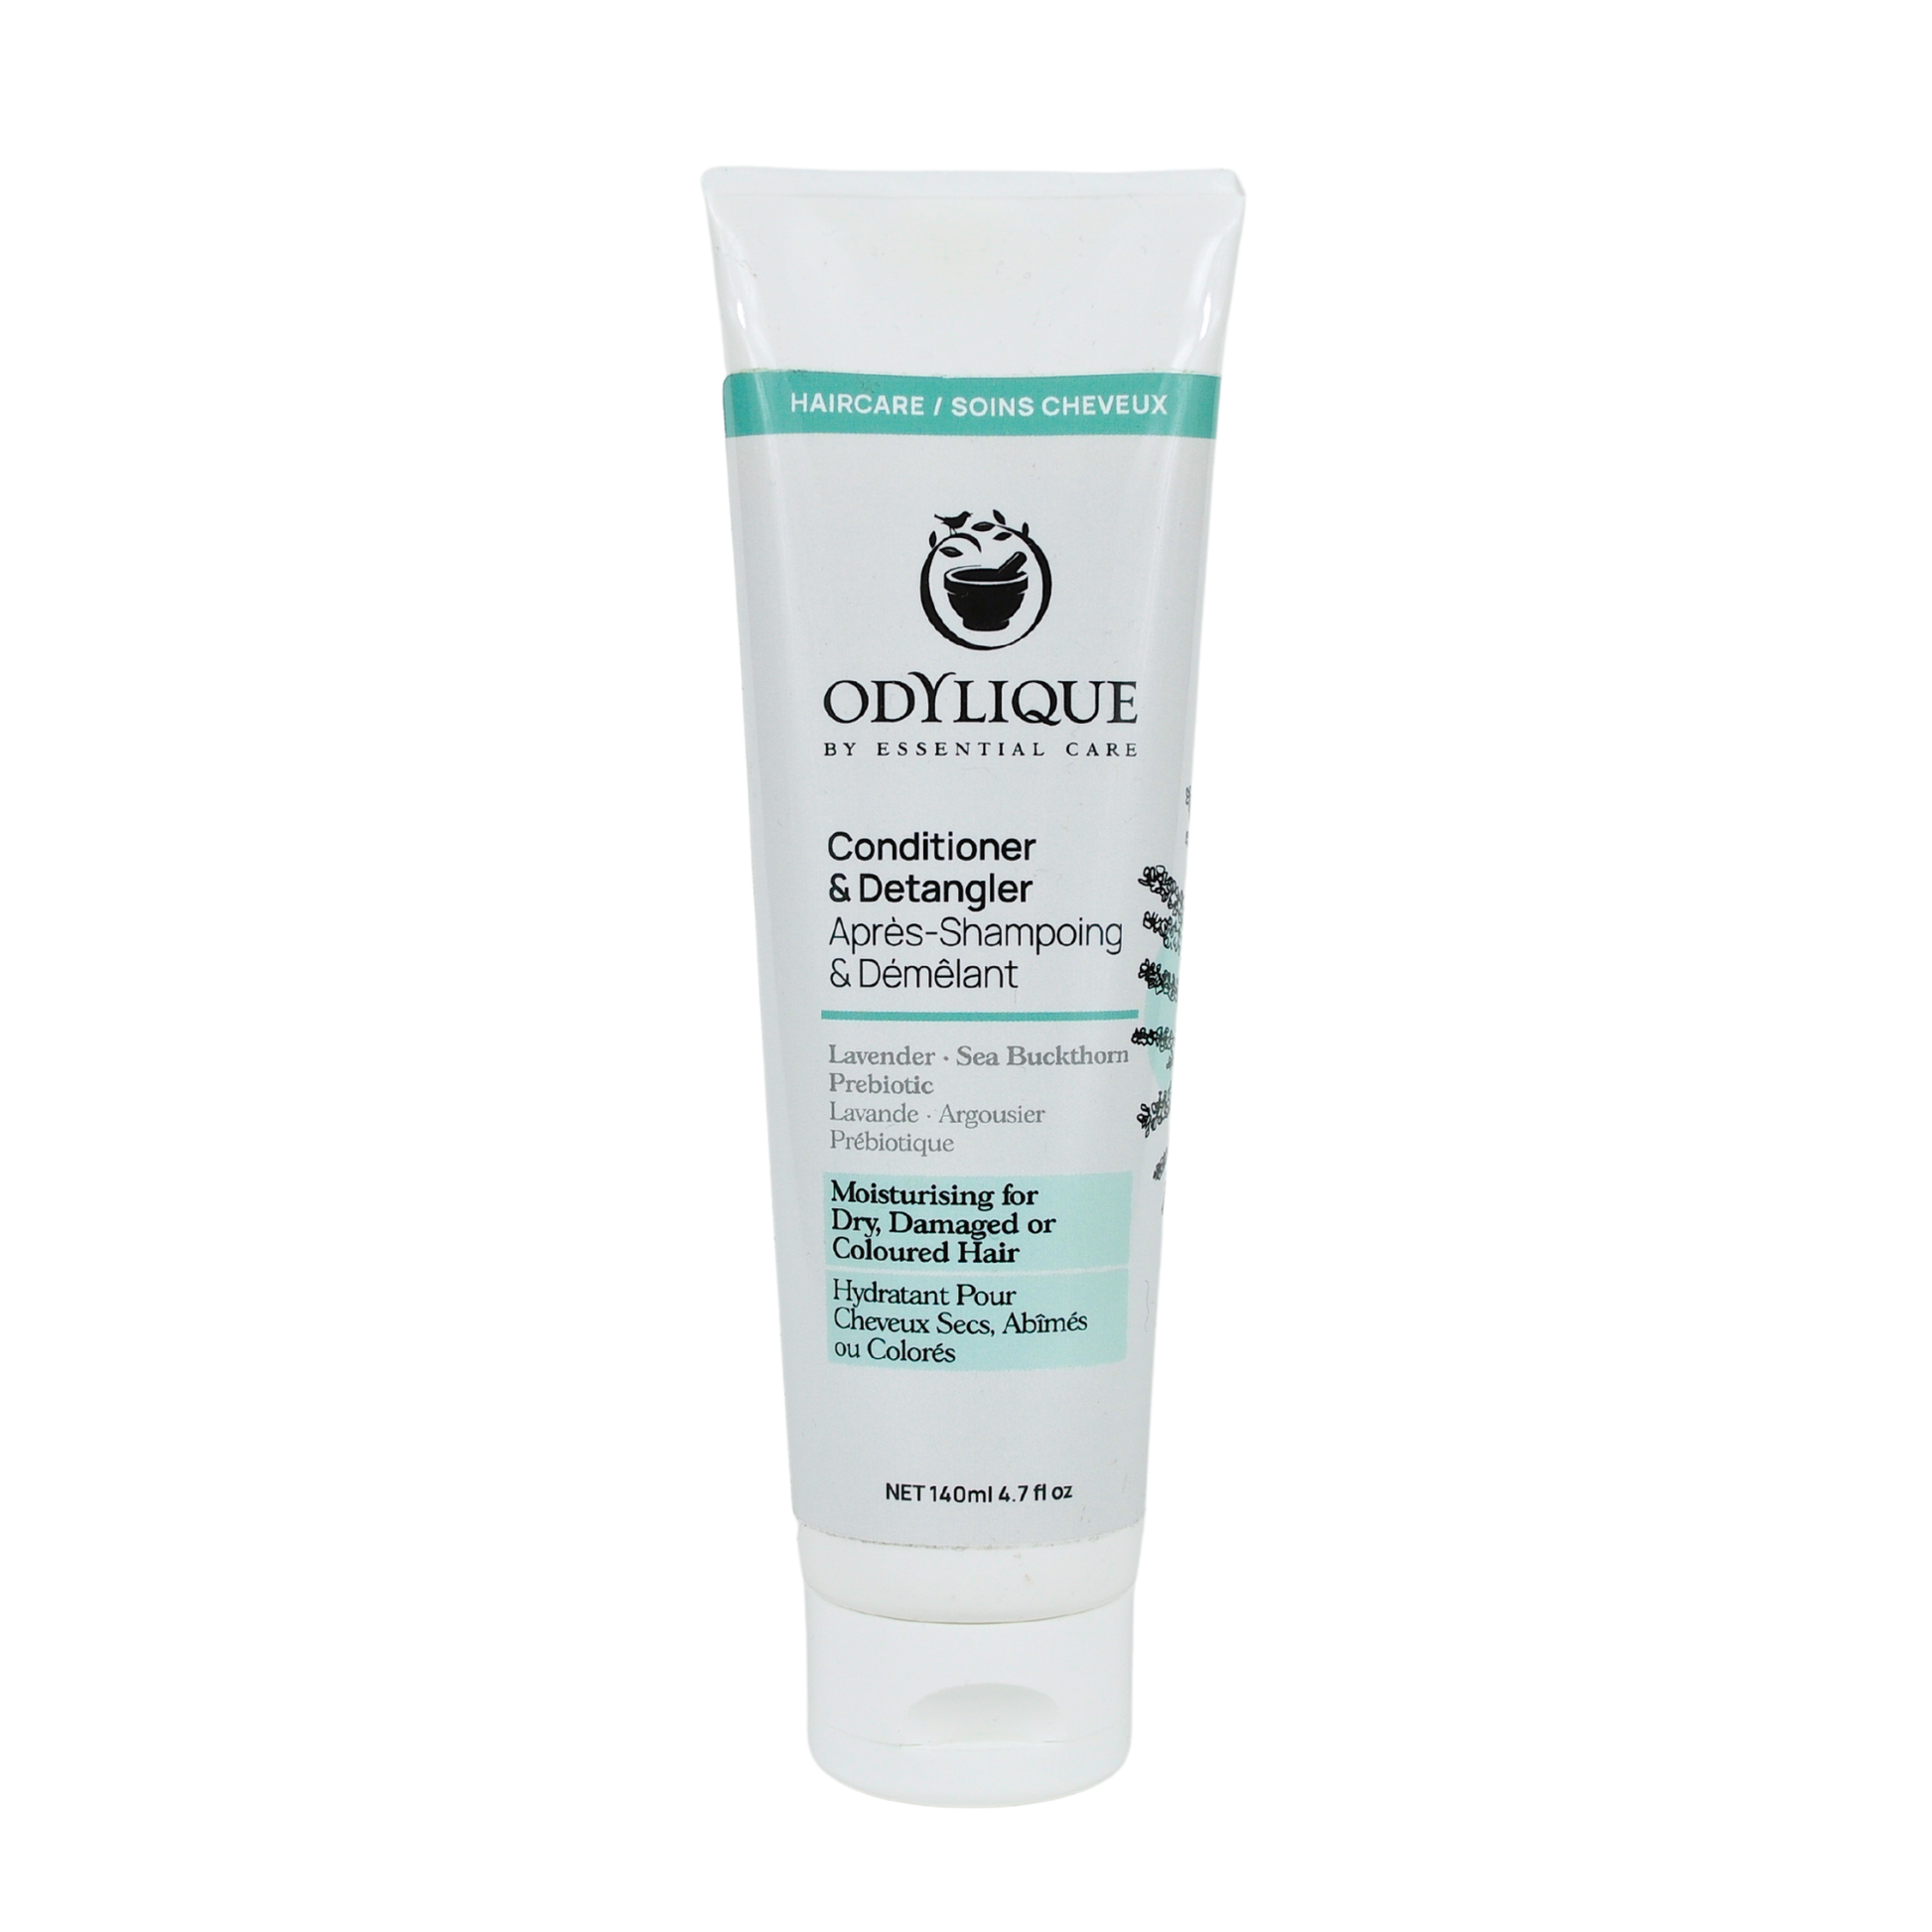 organic lightweight conditioner and detangler made with lavender and seabuckthorn to hydrate. Moisturising for dry, damaged or coloured hair. In a white tube with teal accents